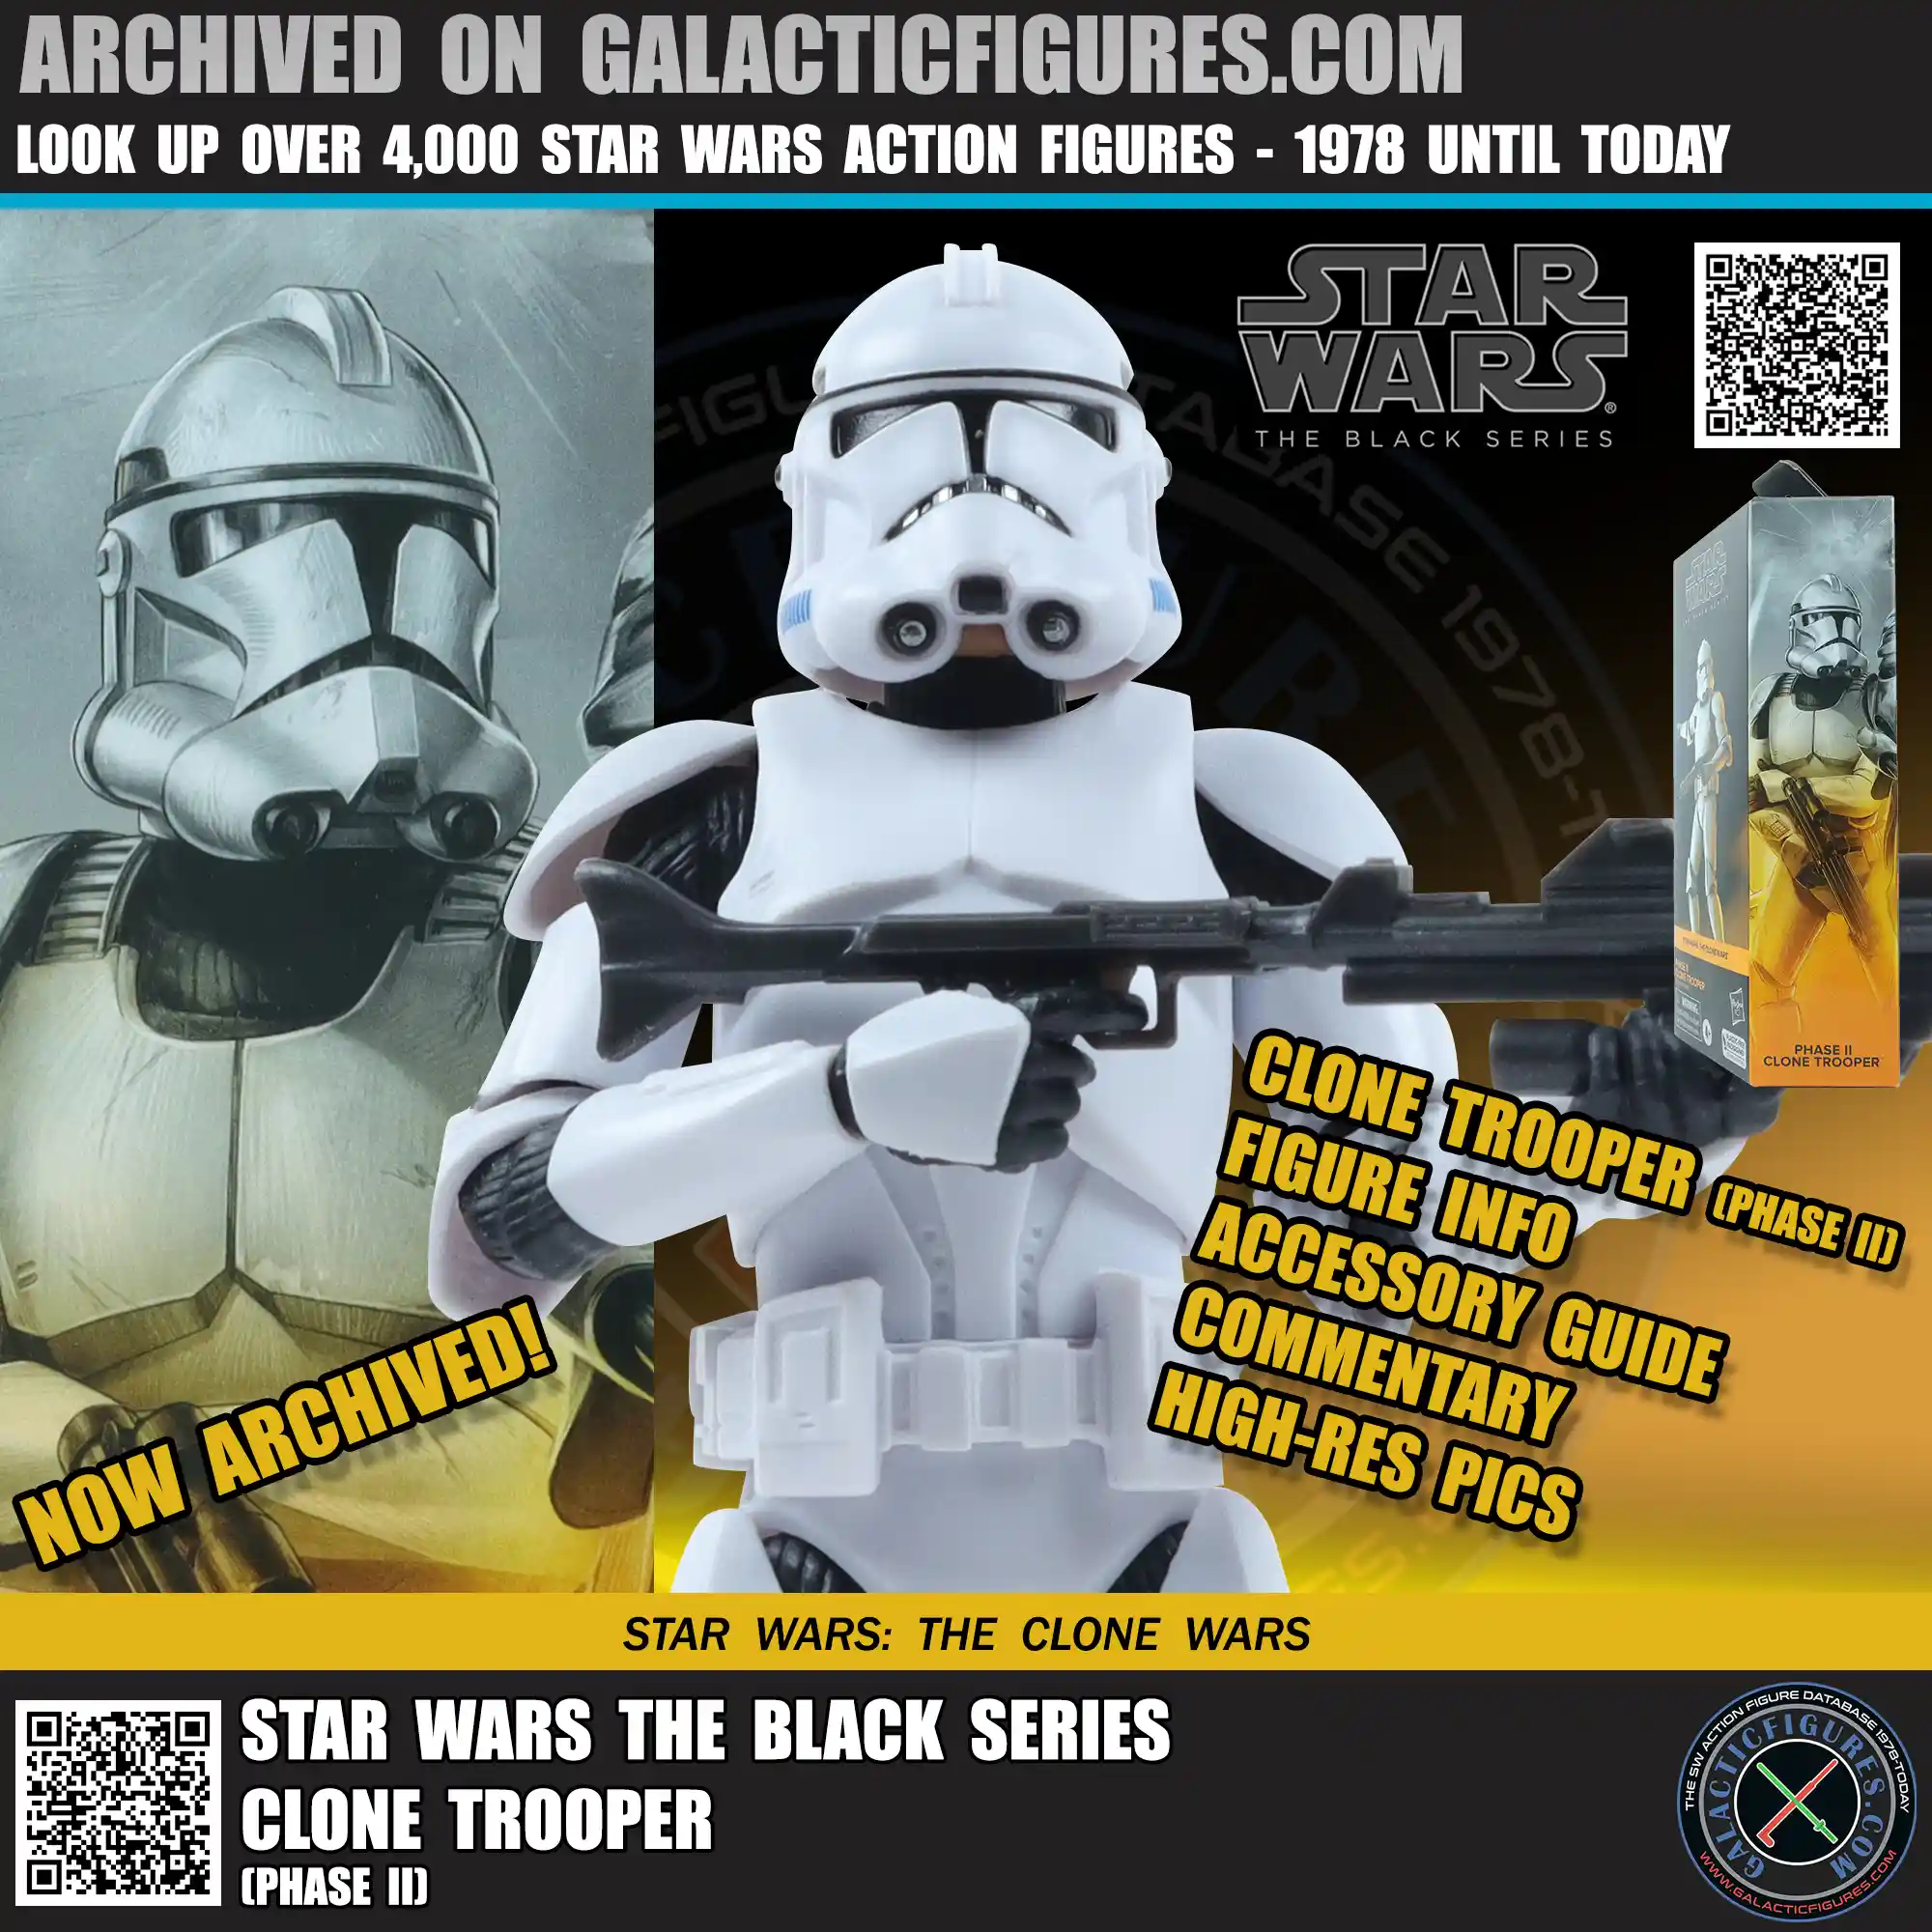 Black Series Clone Trooper Phase II Now Archived